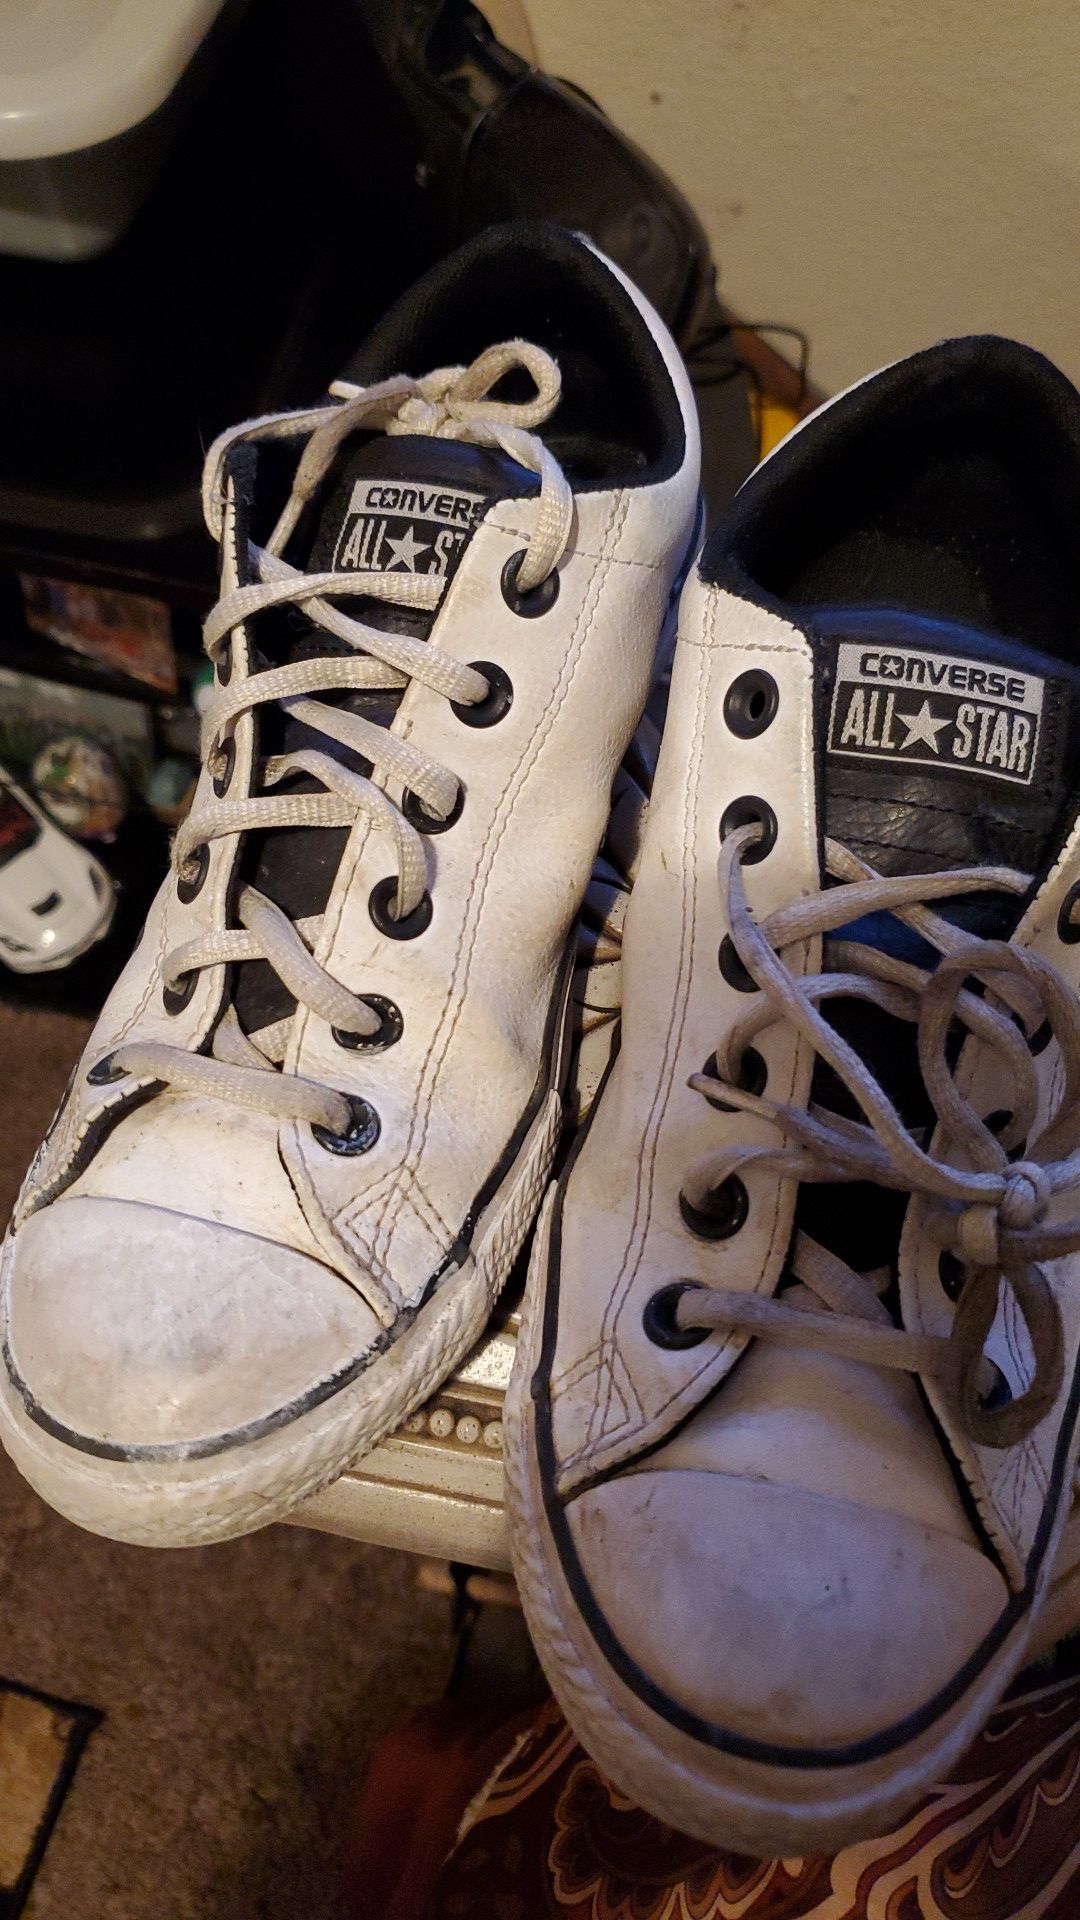 Converse boys size 5 take then for 6.00 they just need to be cleaned